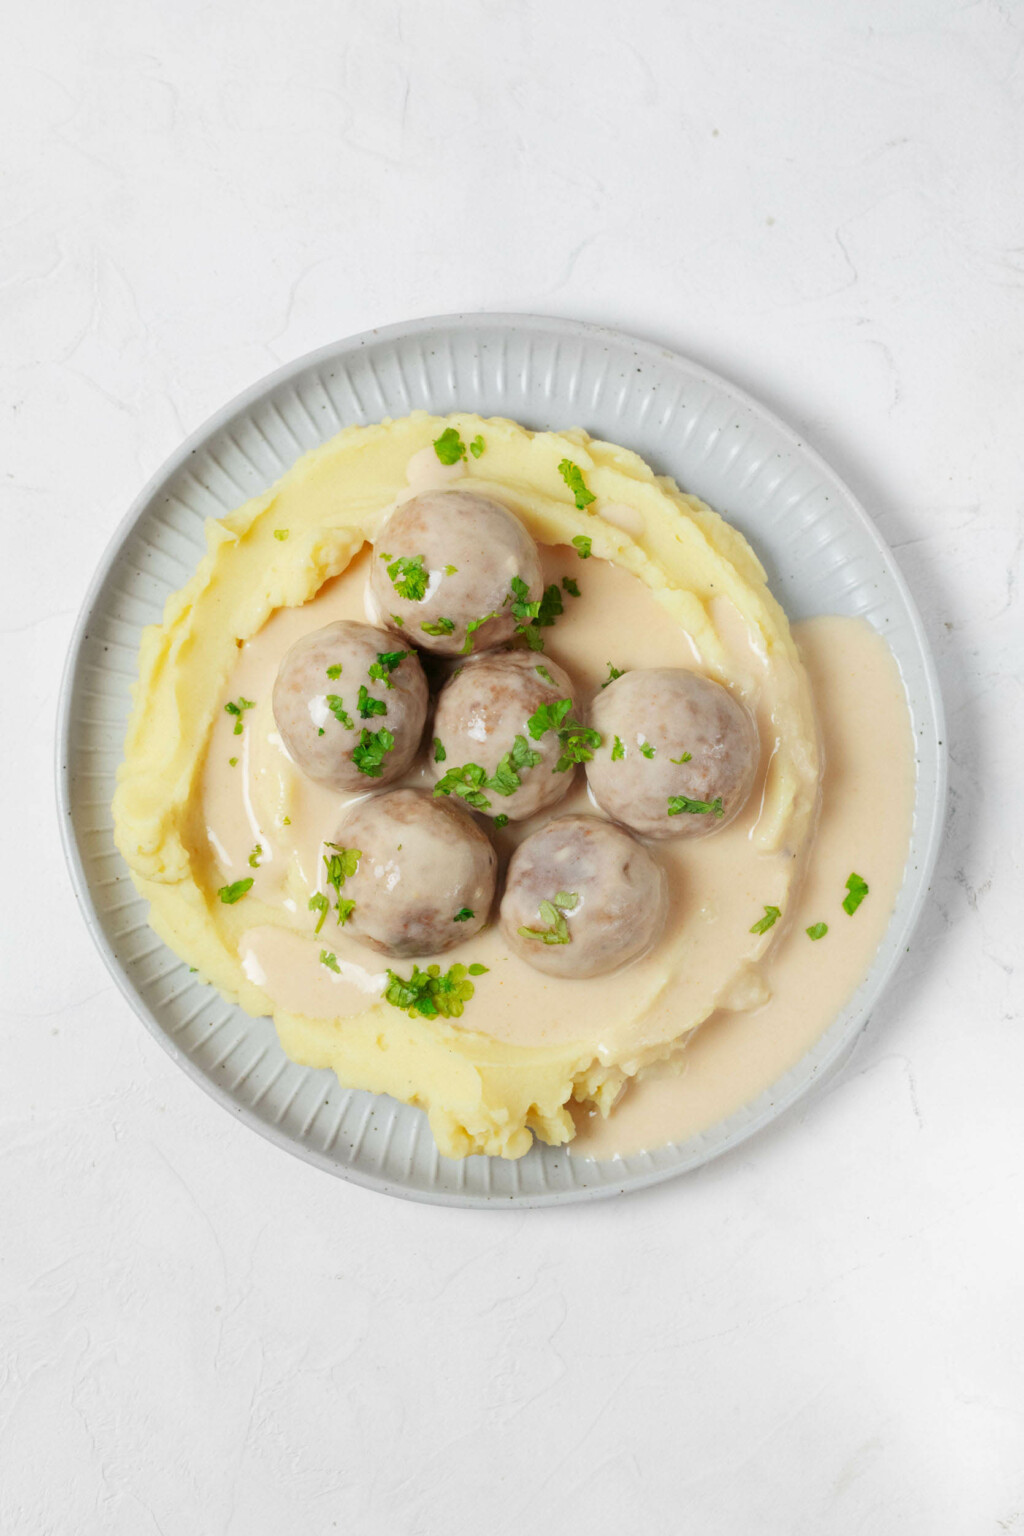 A round, gray white plate is topped with mashed potatoes, vegan Swedish meatballs, and chopped parsley.